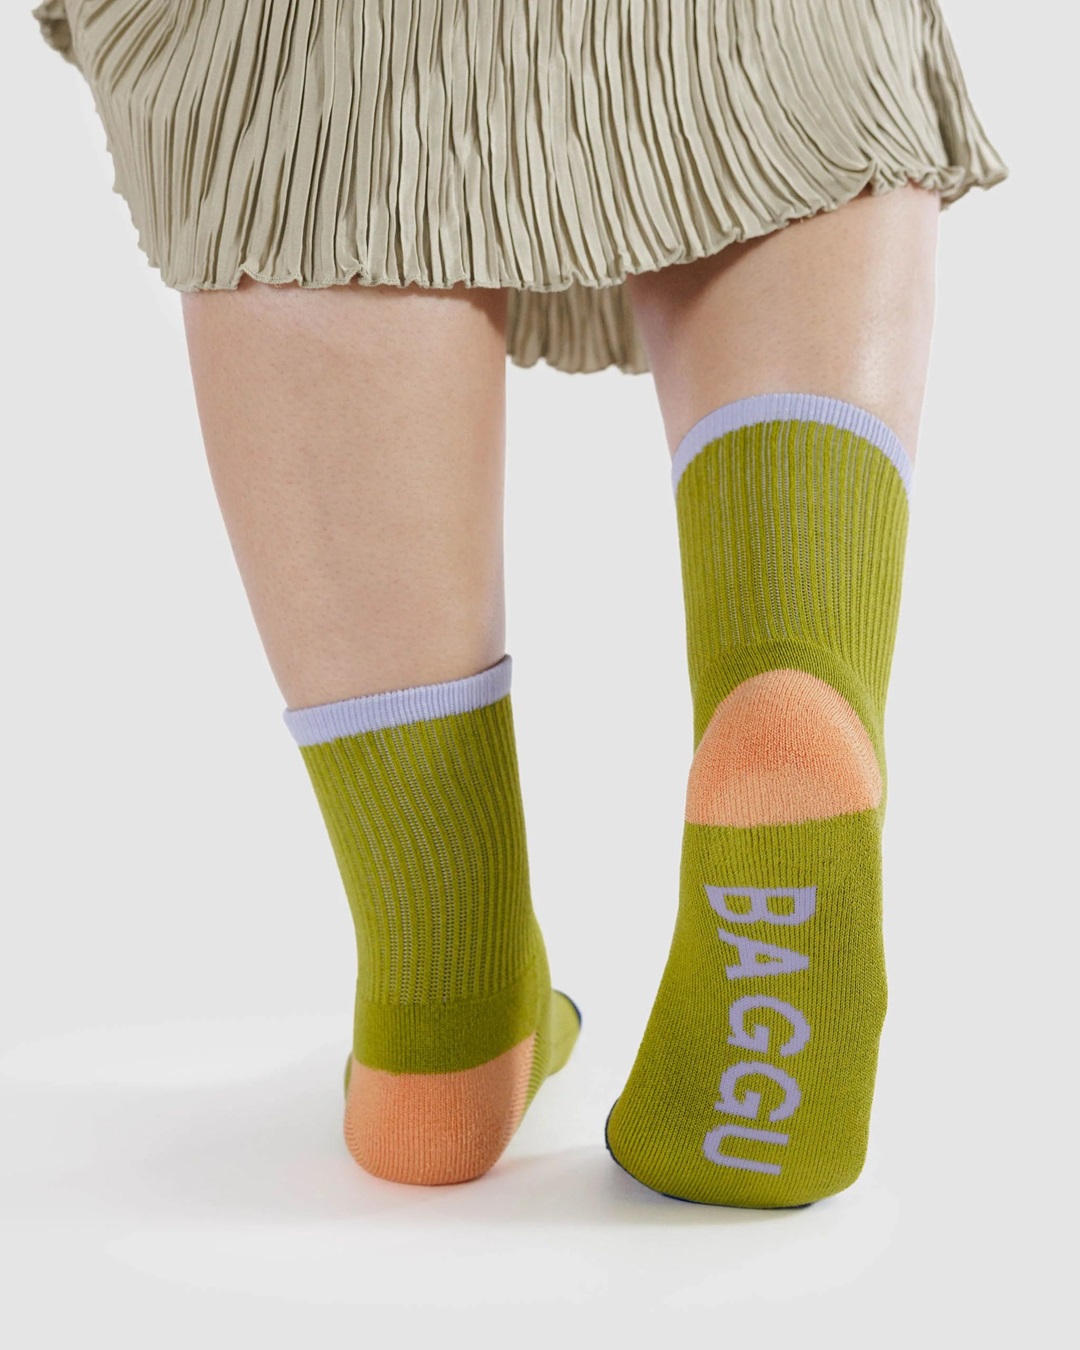 Lemongrass pair of socks of feet with navy blue coloured toes and orange heels